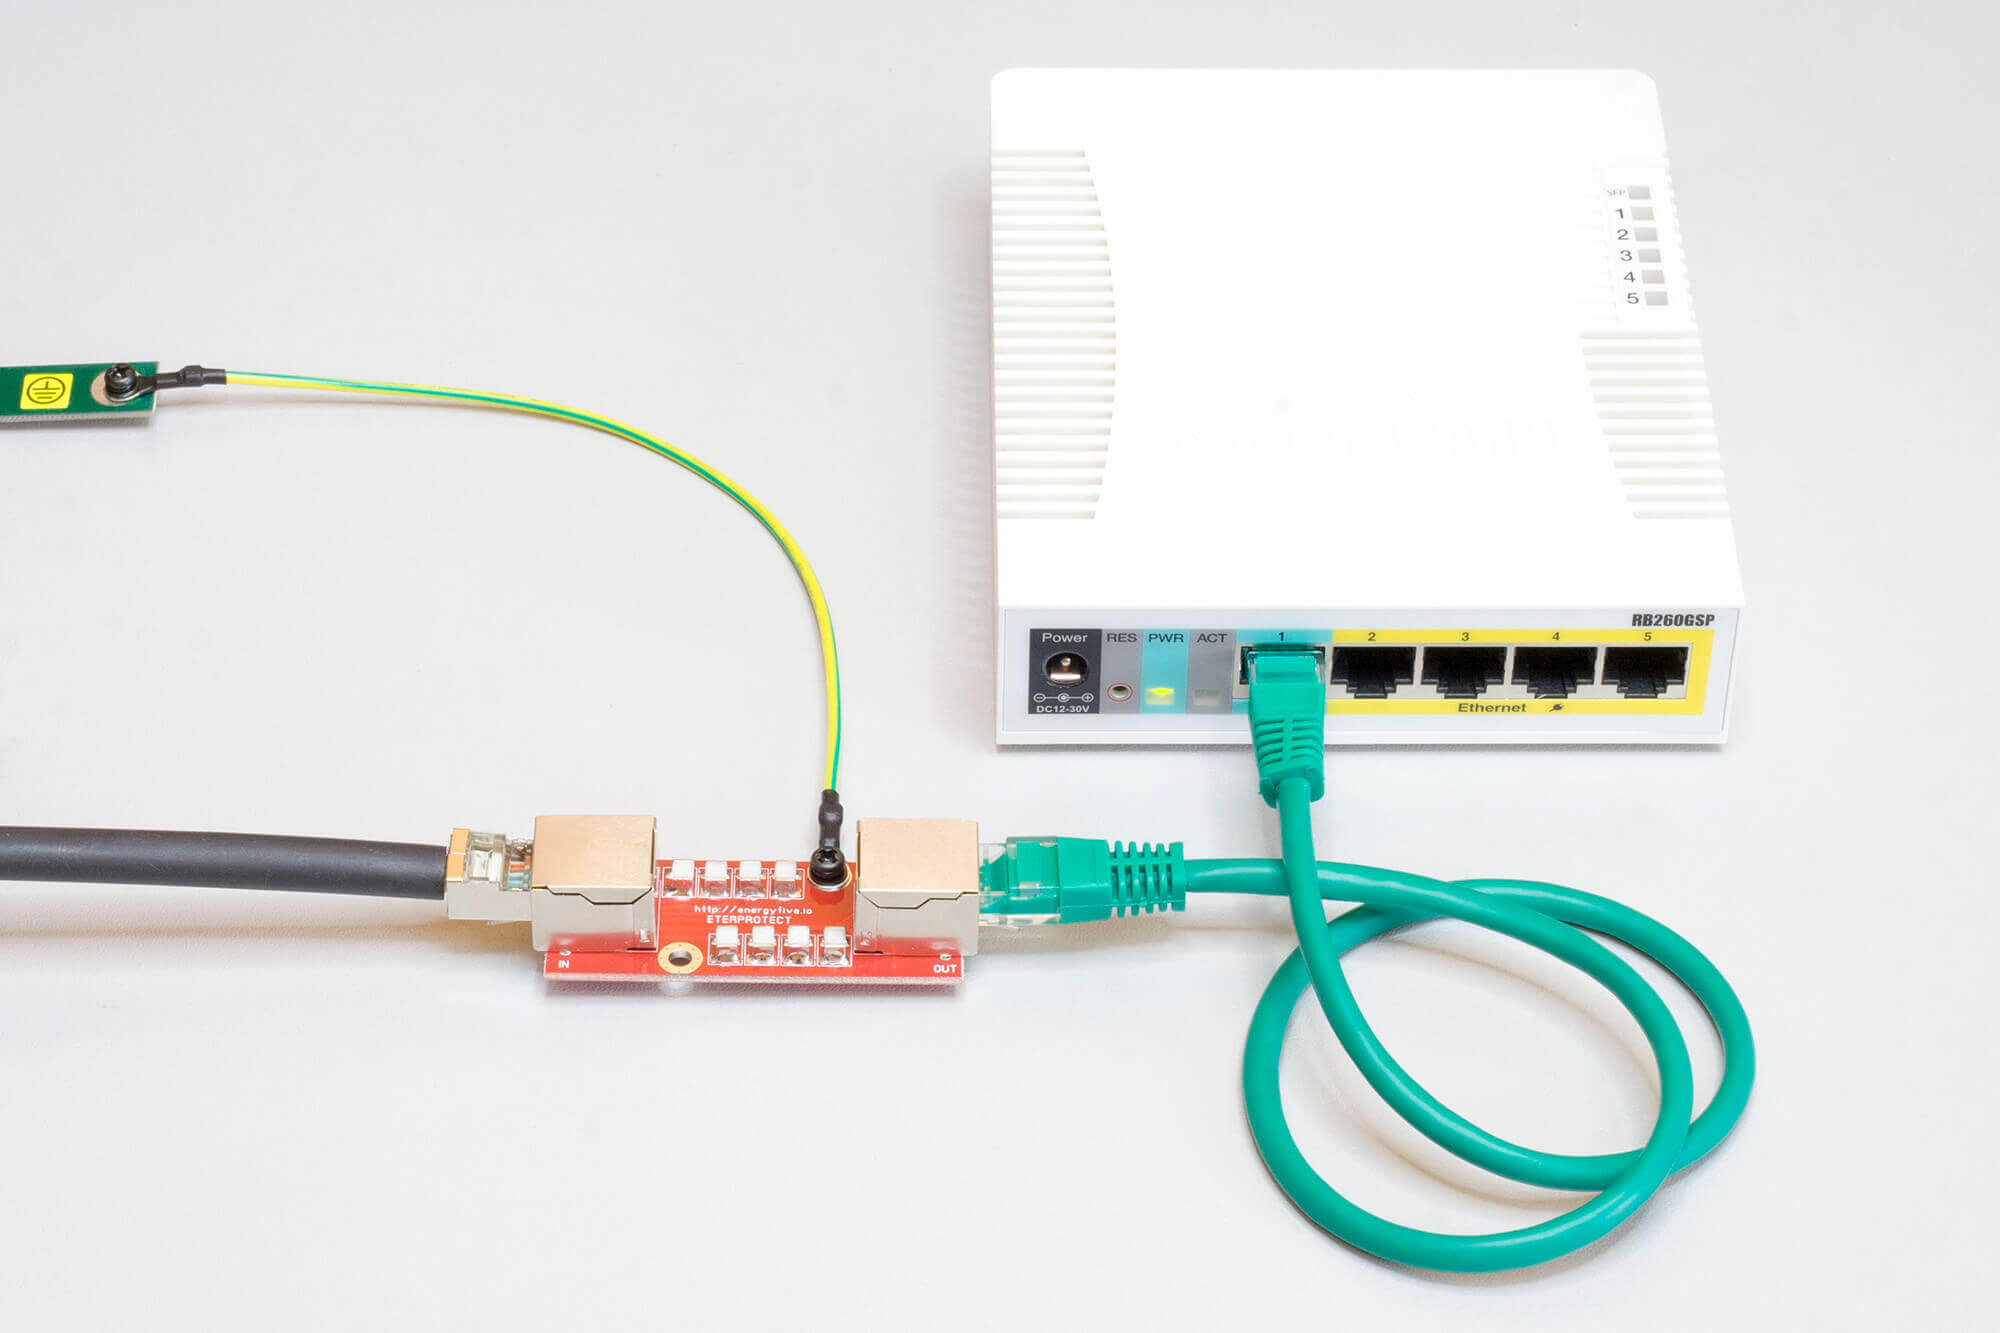 Surge protections for Gigabit Ethernet